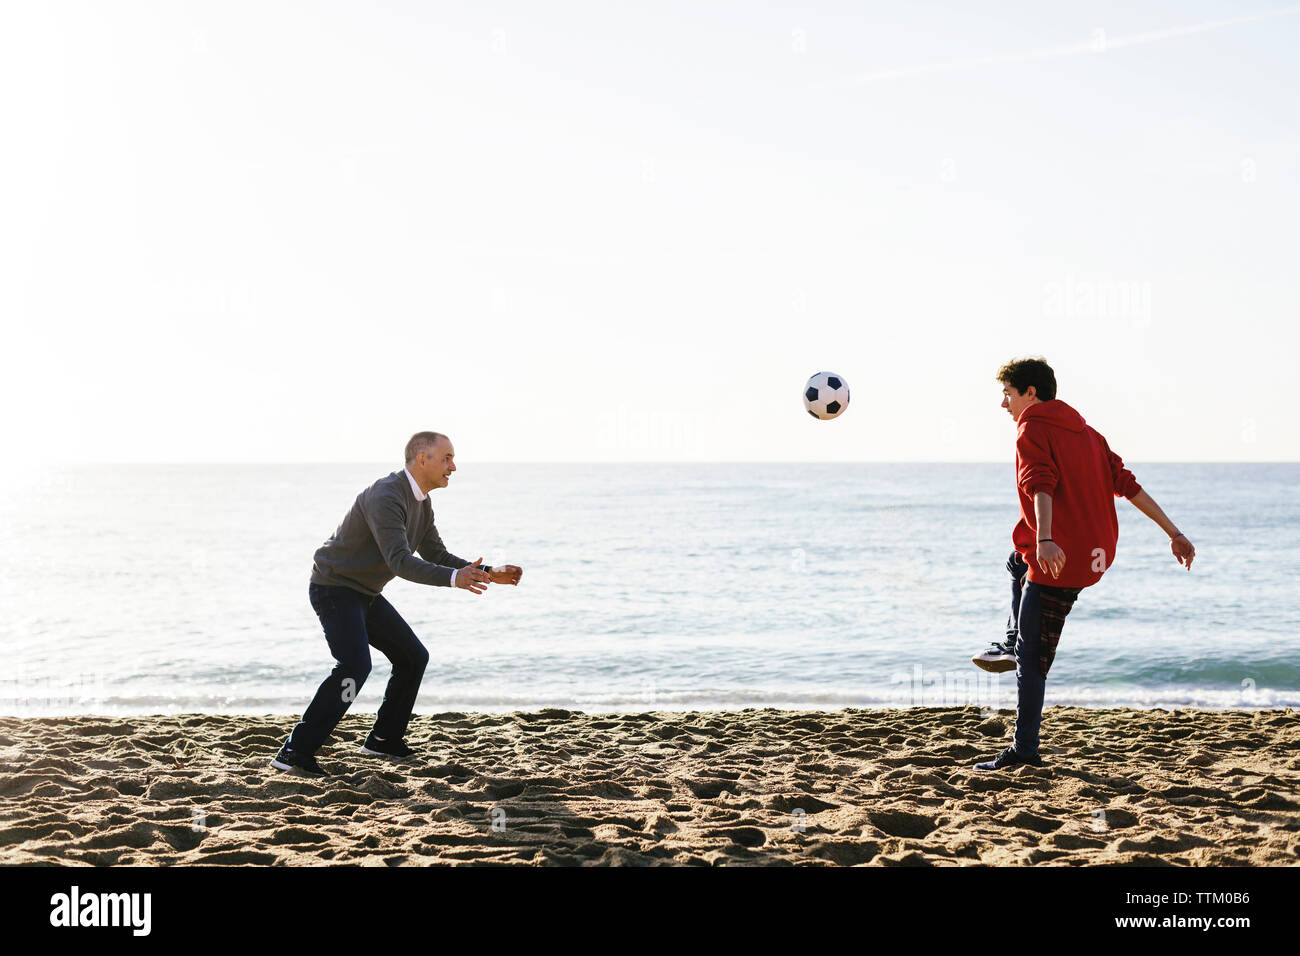 Playful son kicking soccer ball while father defending at beach against clear sky Stock Photo